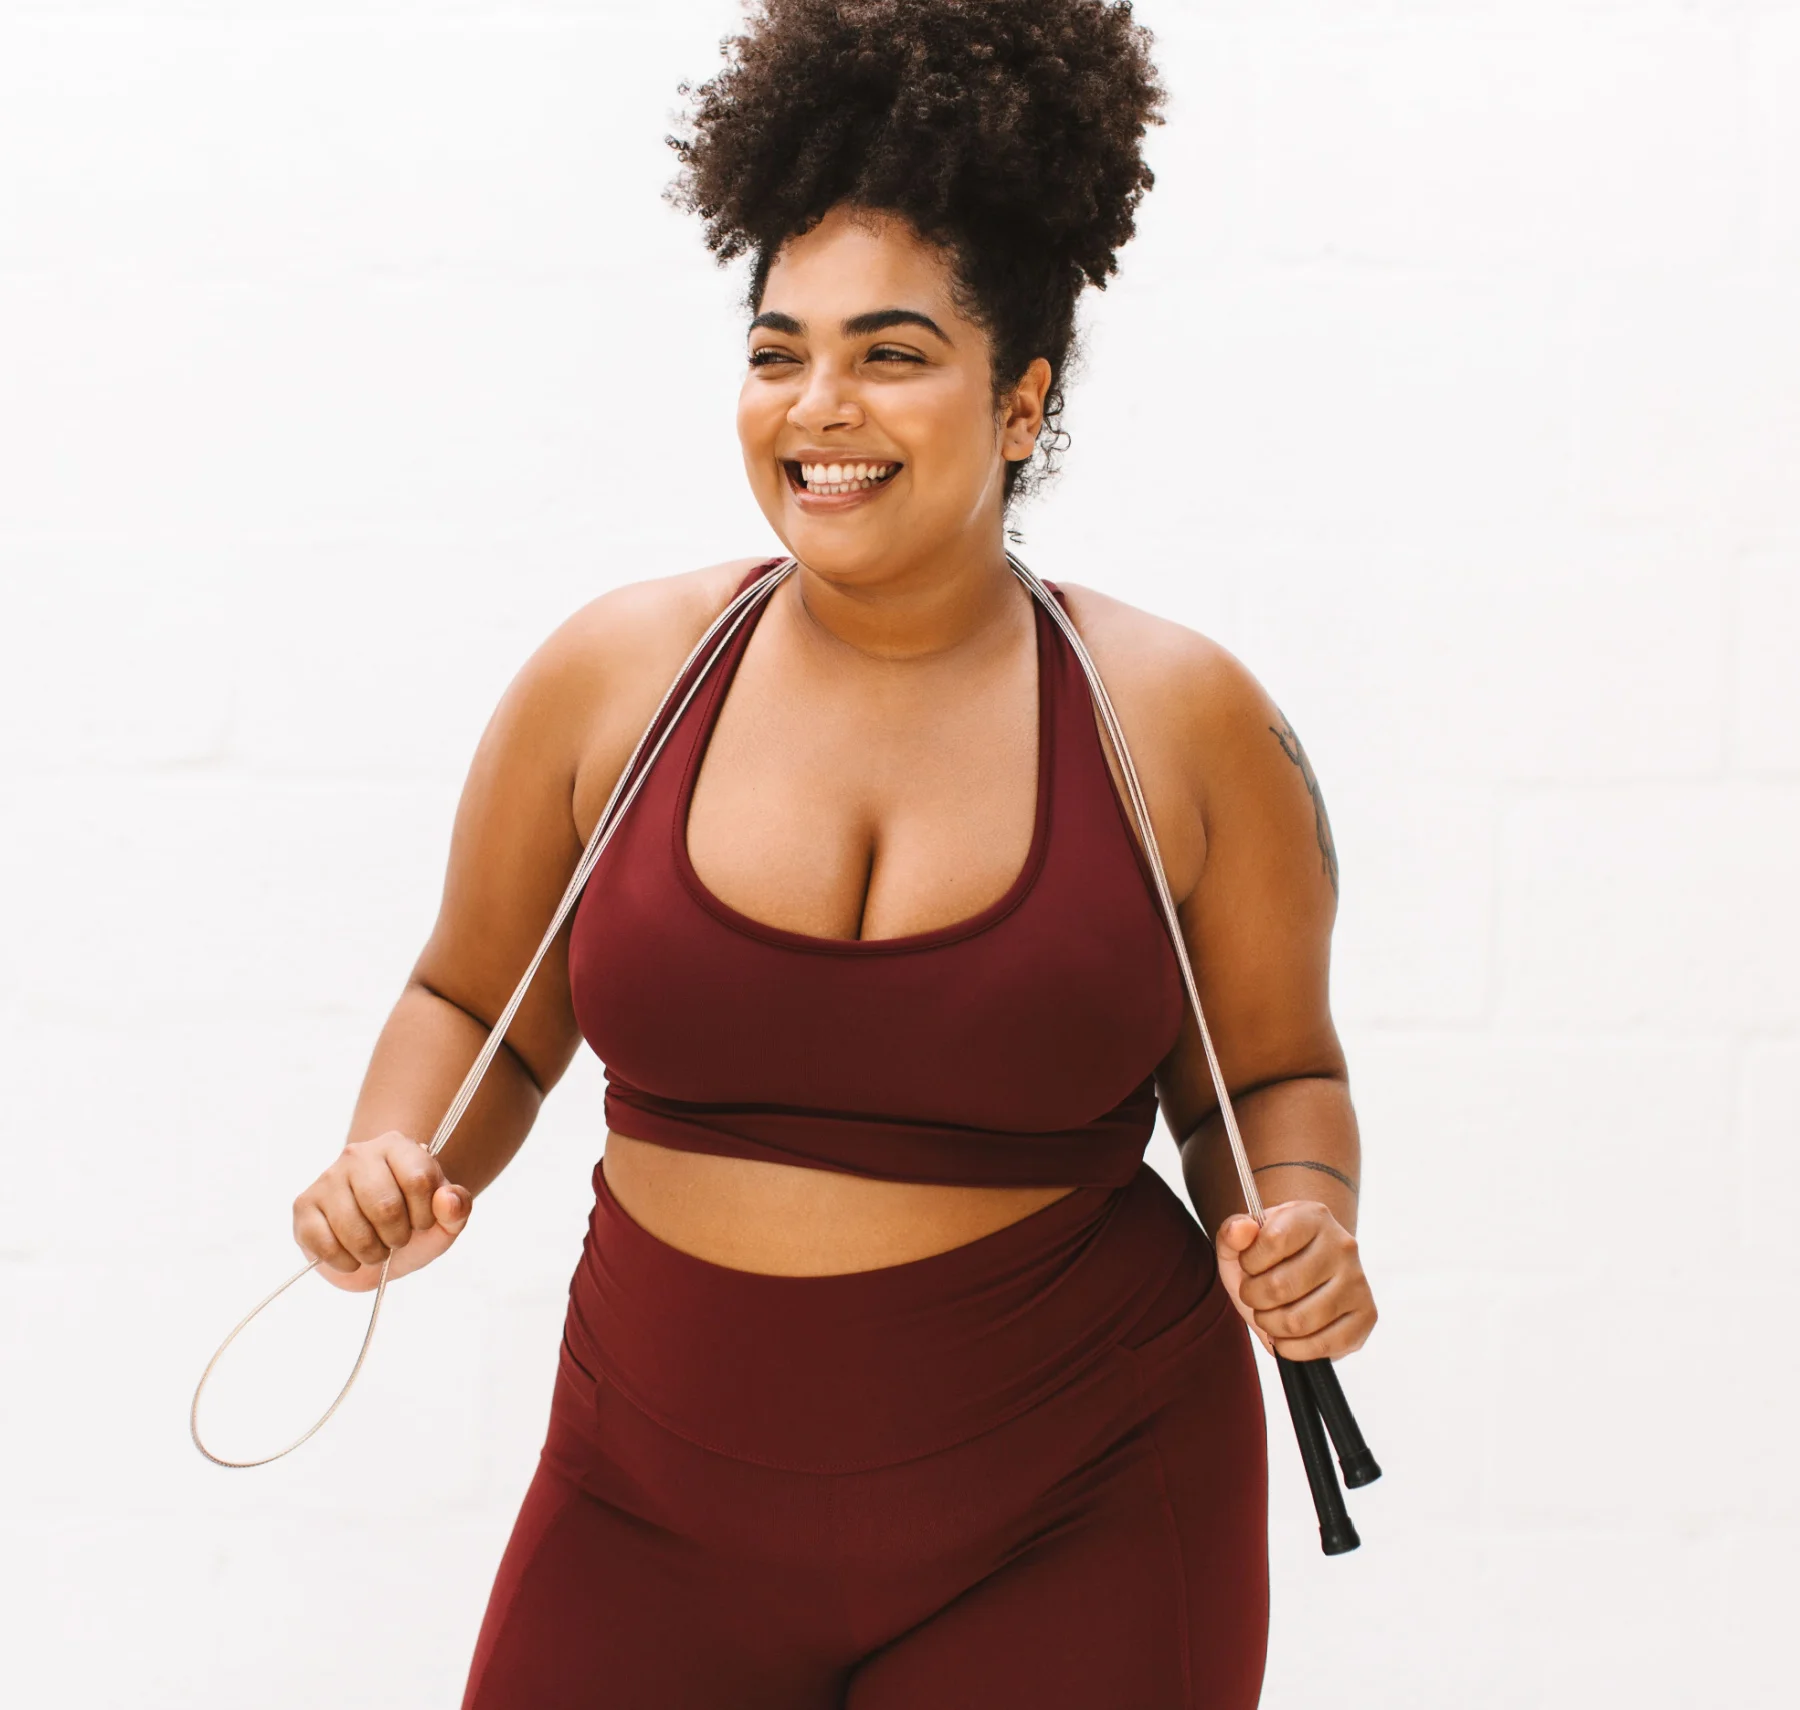 plus size healthy woman exercising for weight loss